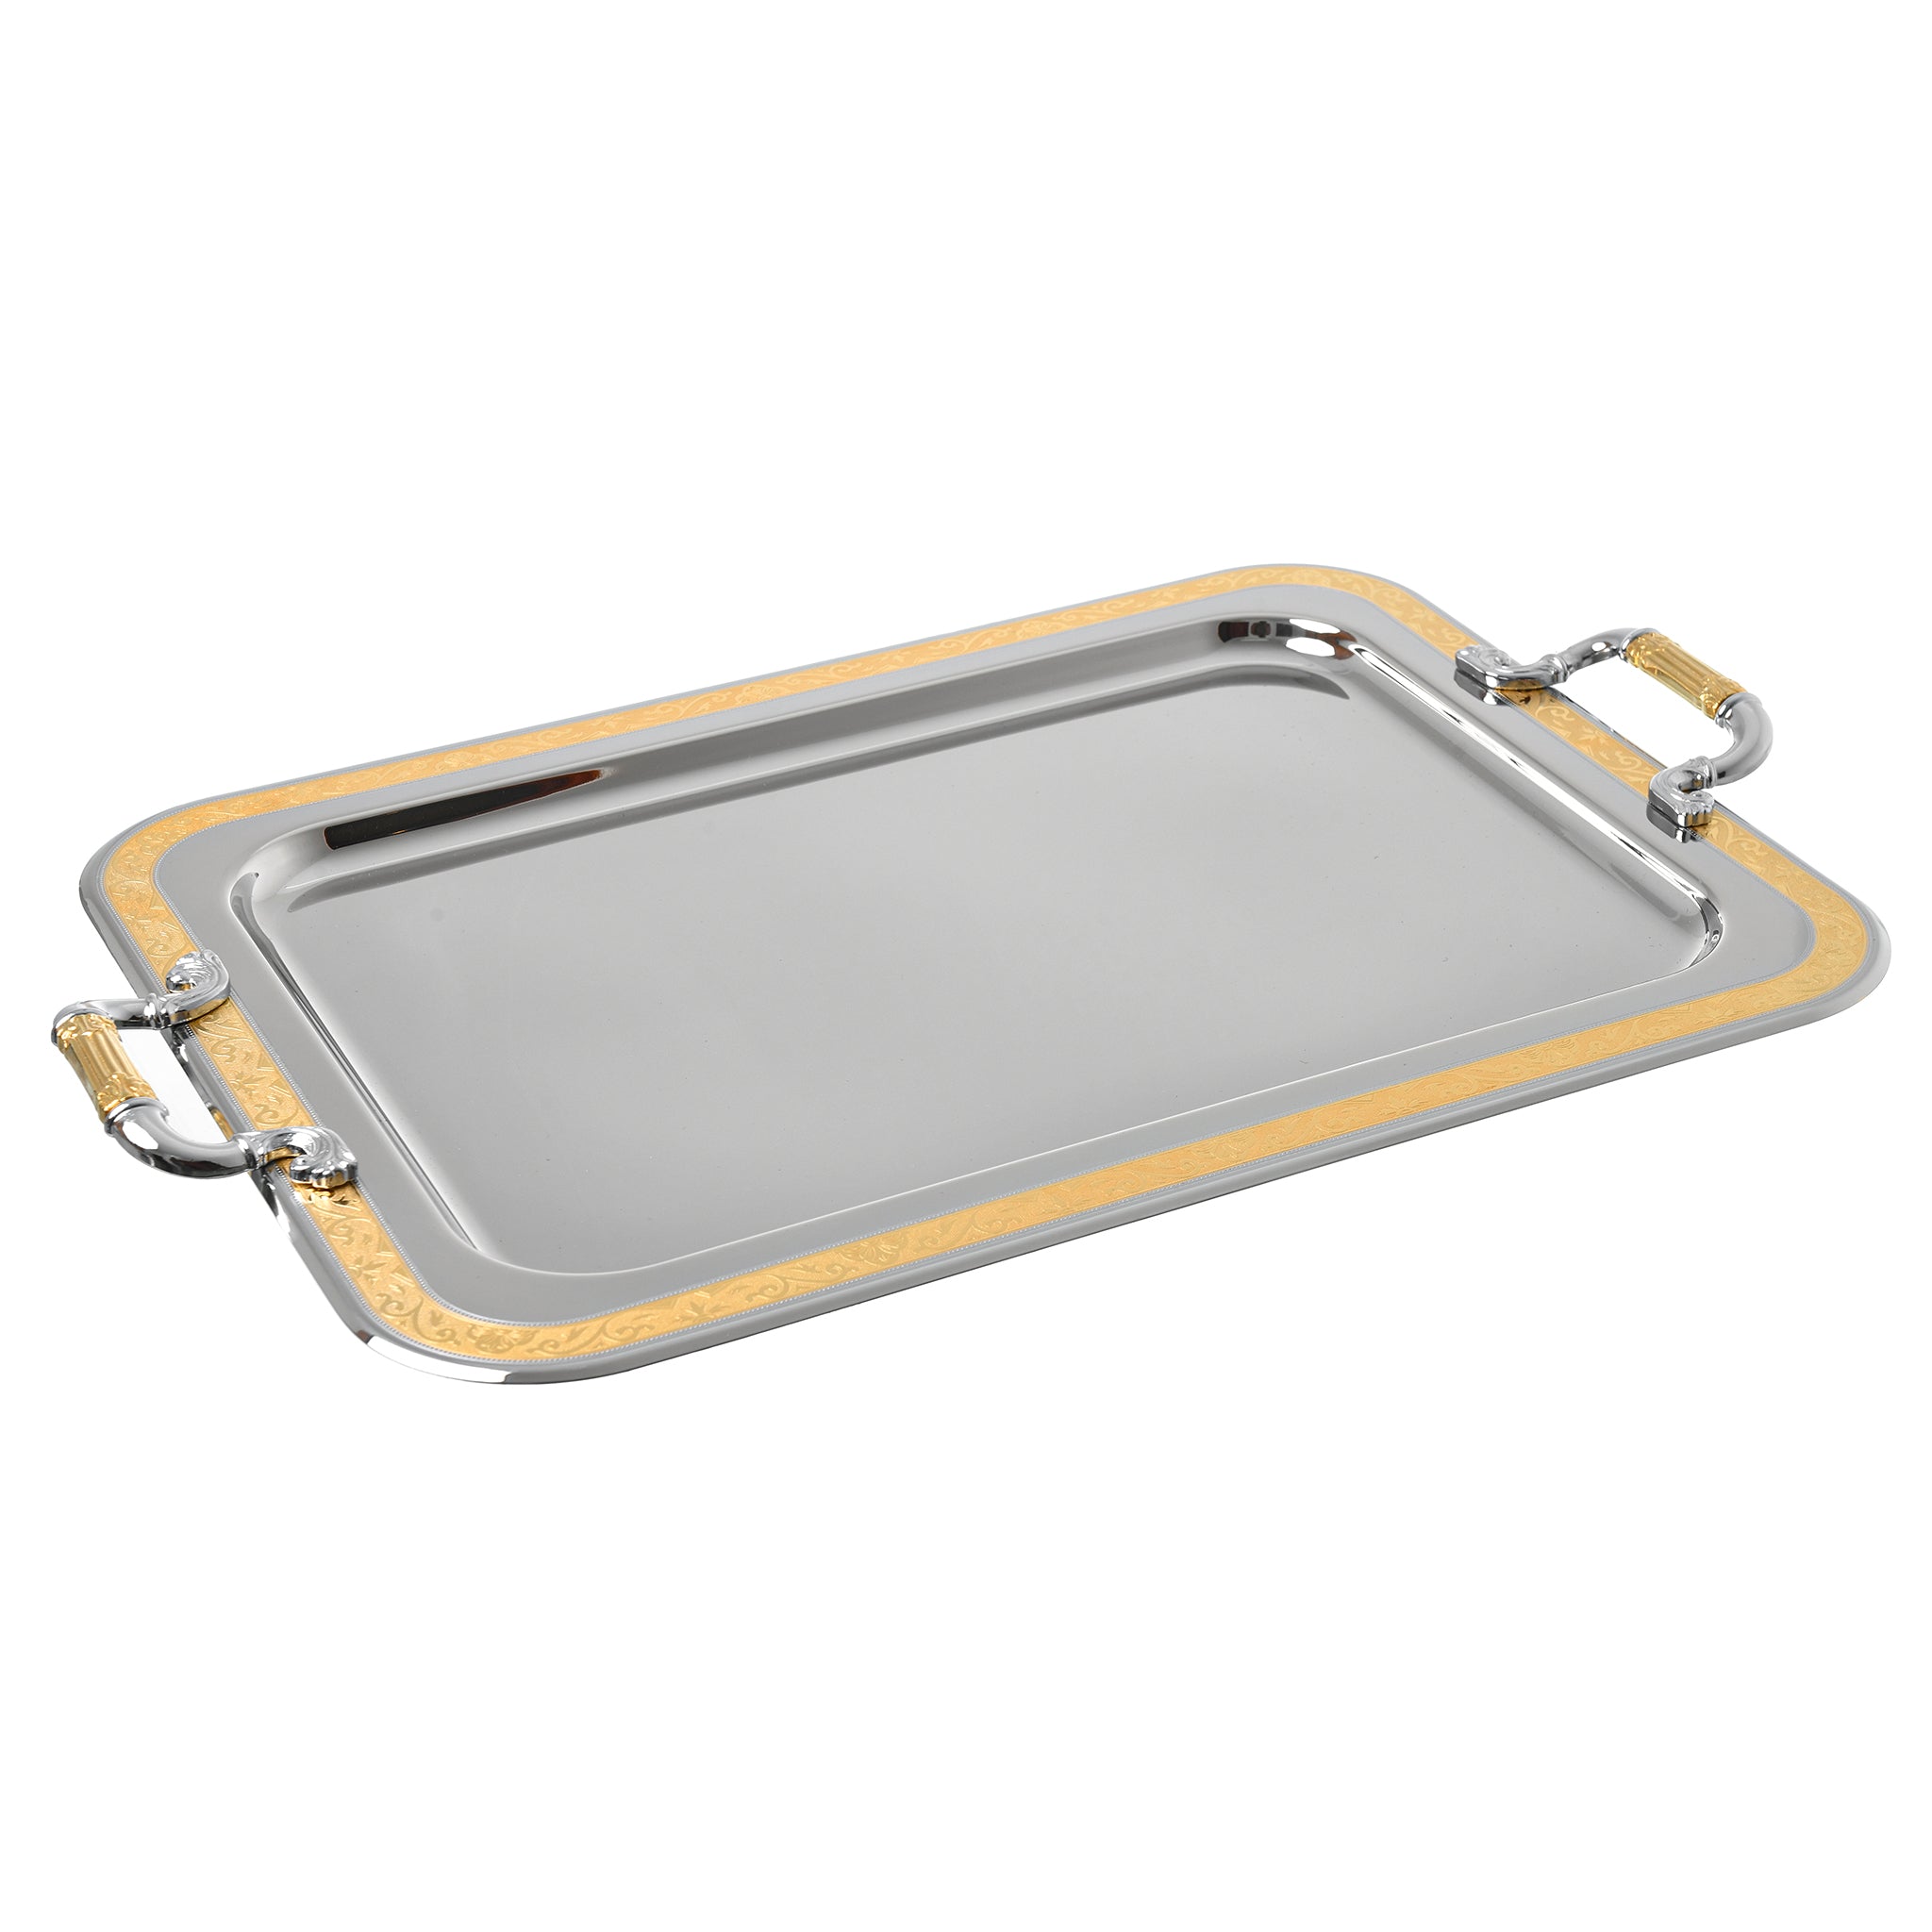 Elegant Gioiel - Rectangular Tray with Handles - Gold - Stainless Steel 18/10 - 50cm - 75000496